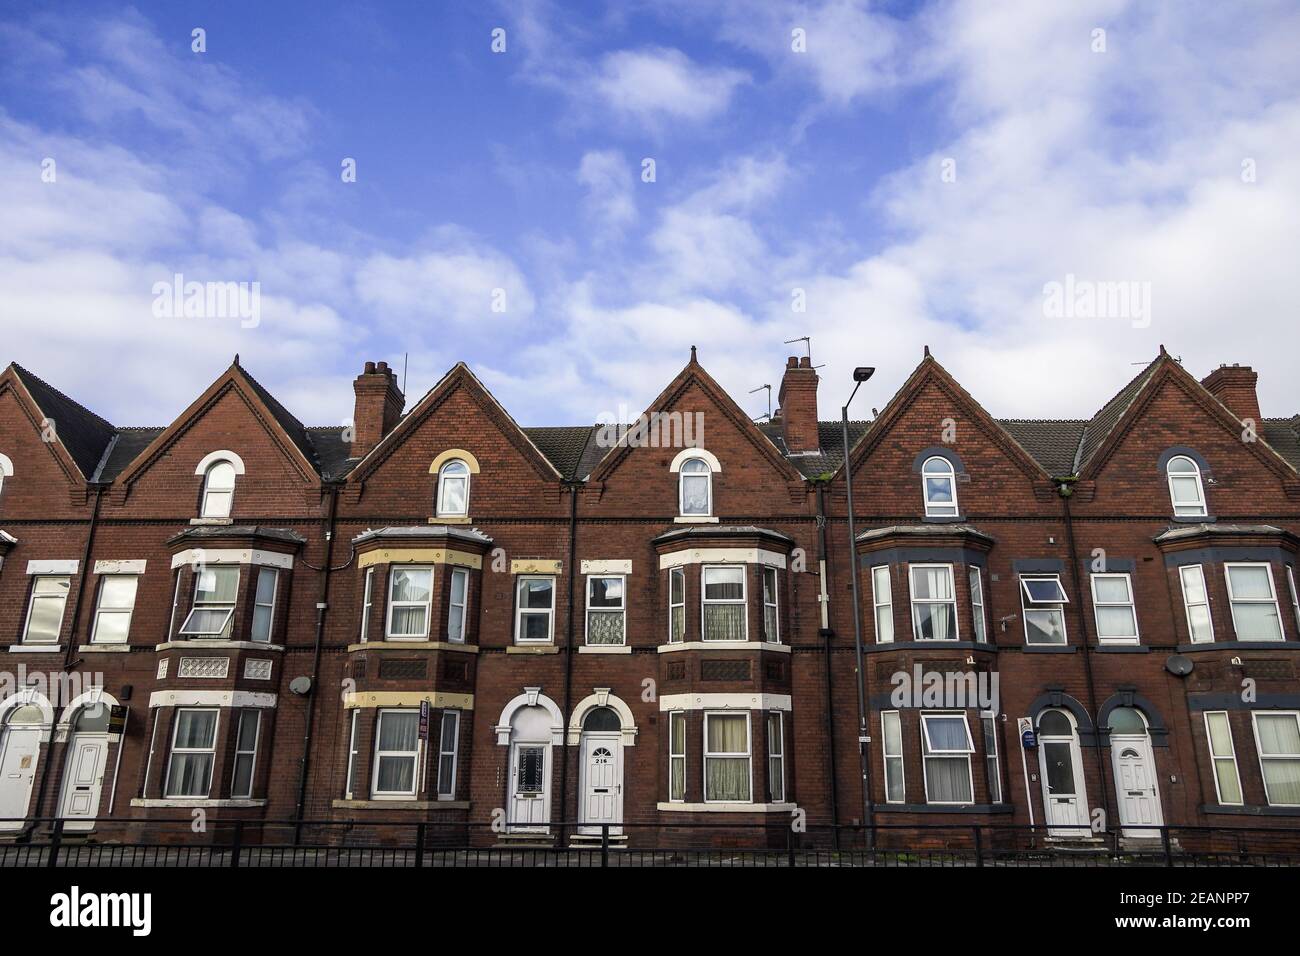 DONCASTER, UK - JANUARY 29, 2021.  A row of traditional terrace houses on a typical UK street with copy space Stock Photo